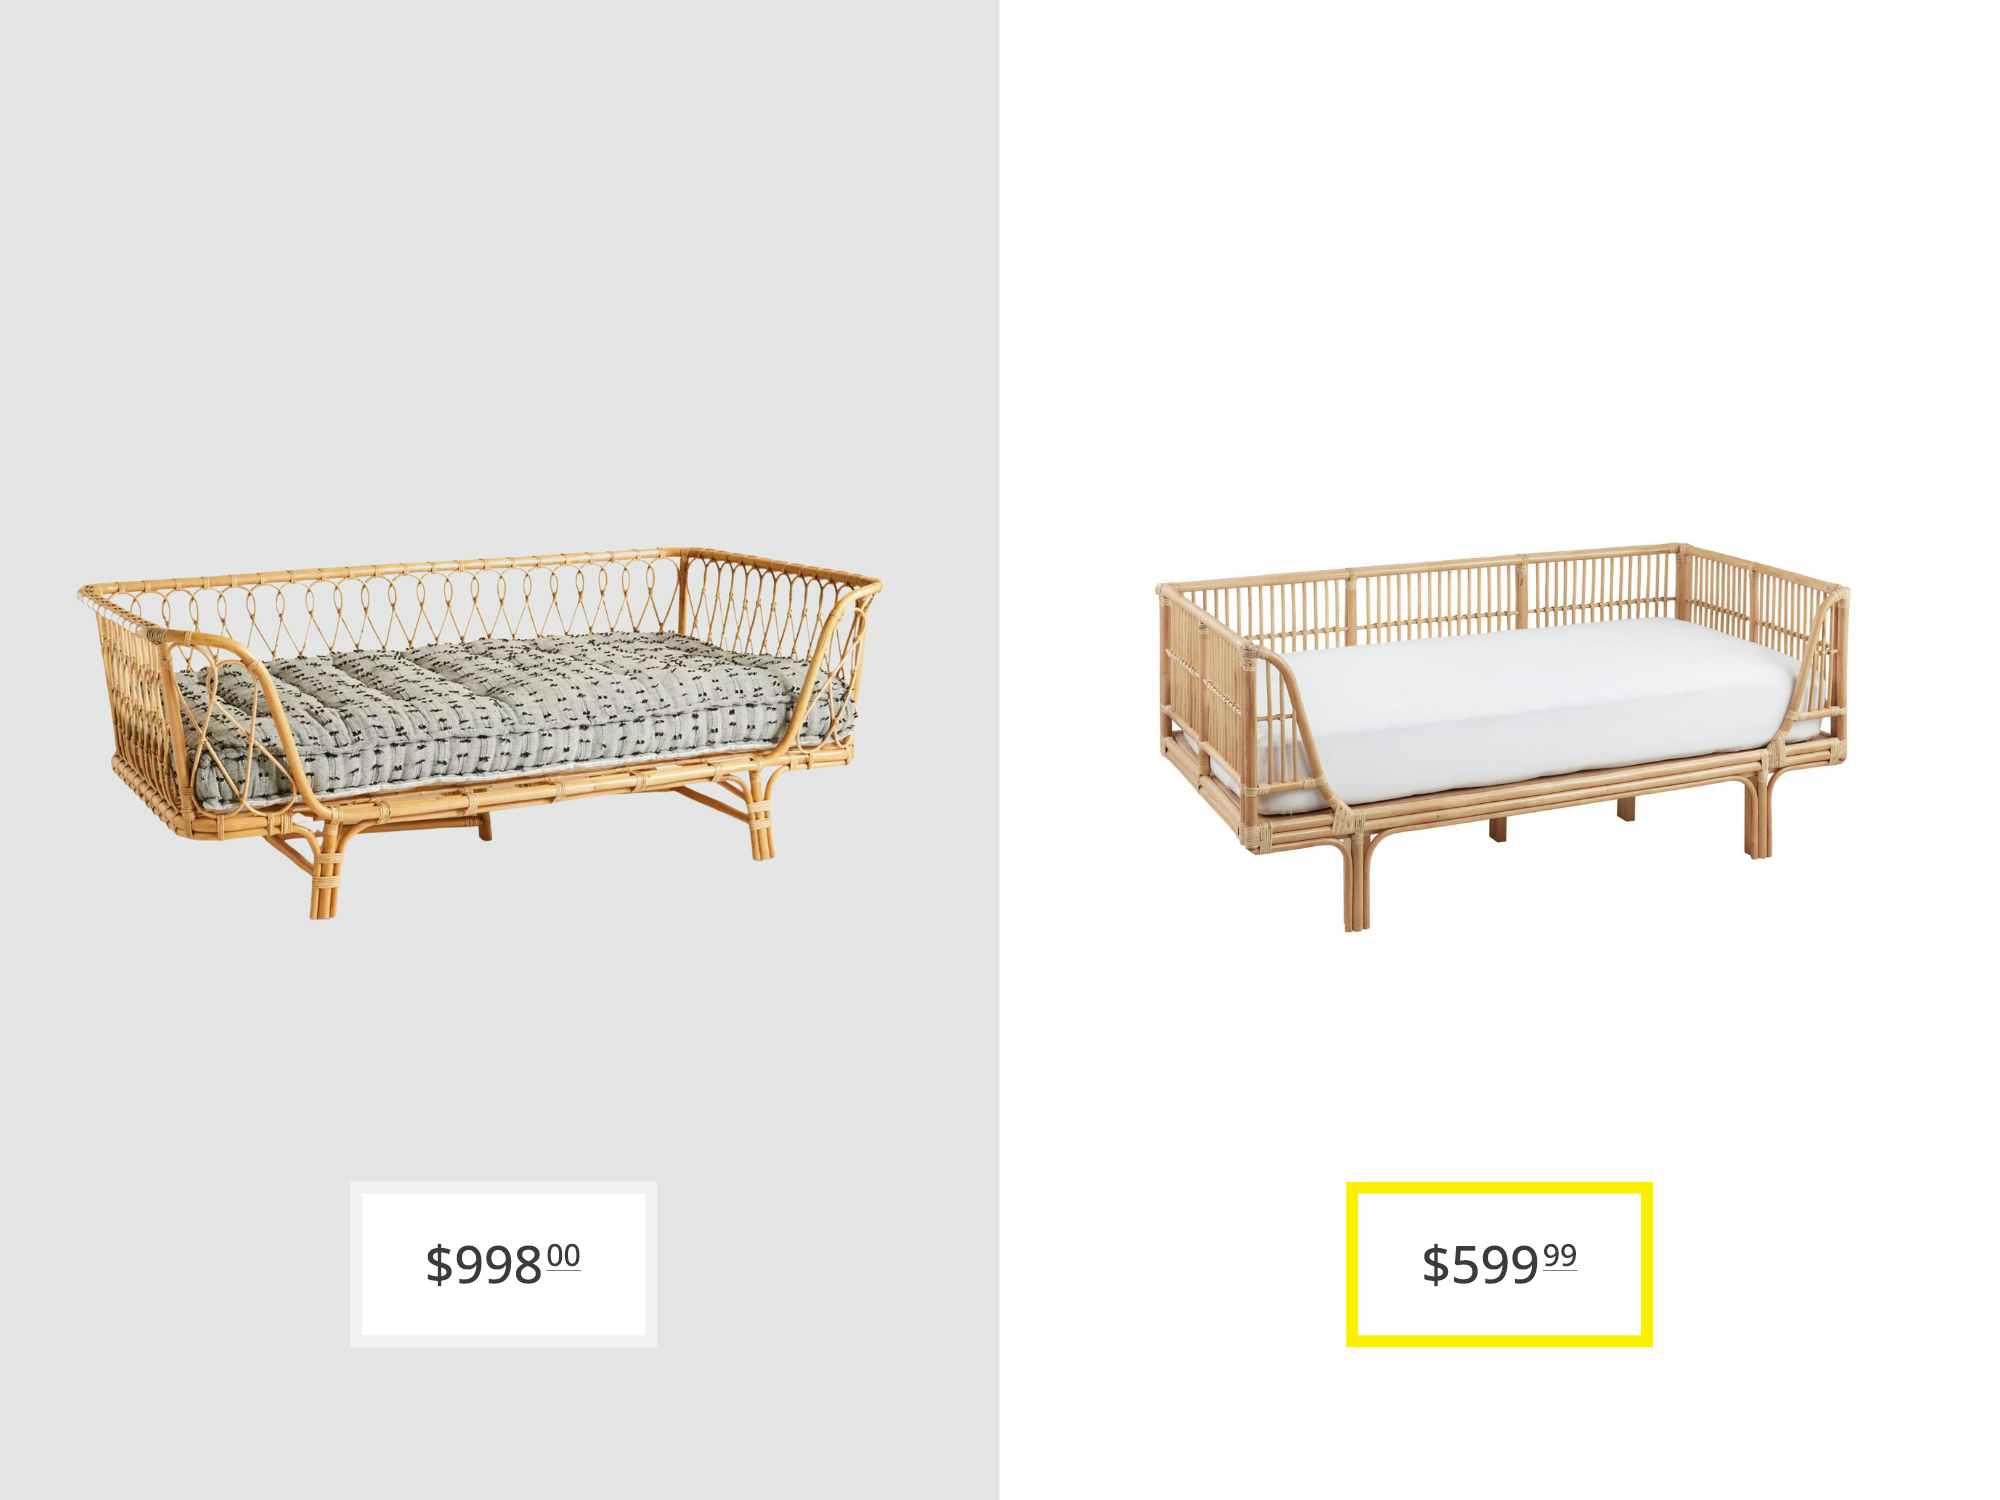 price comparison graphic with anthropologie venus rattan daybed and world market honey rattan daybed